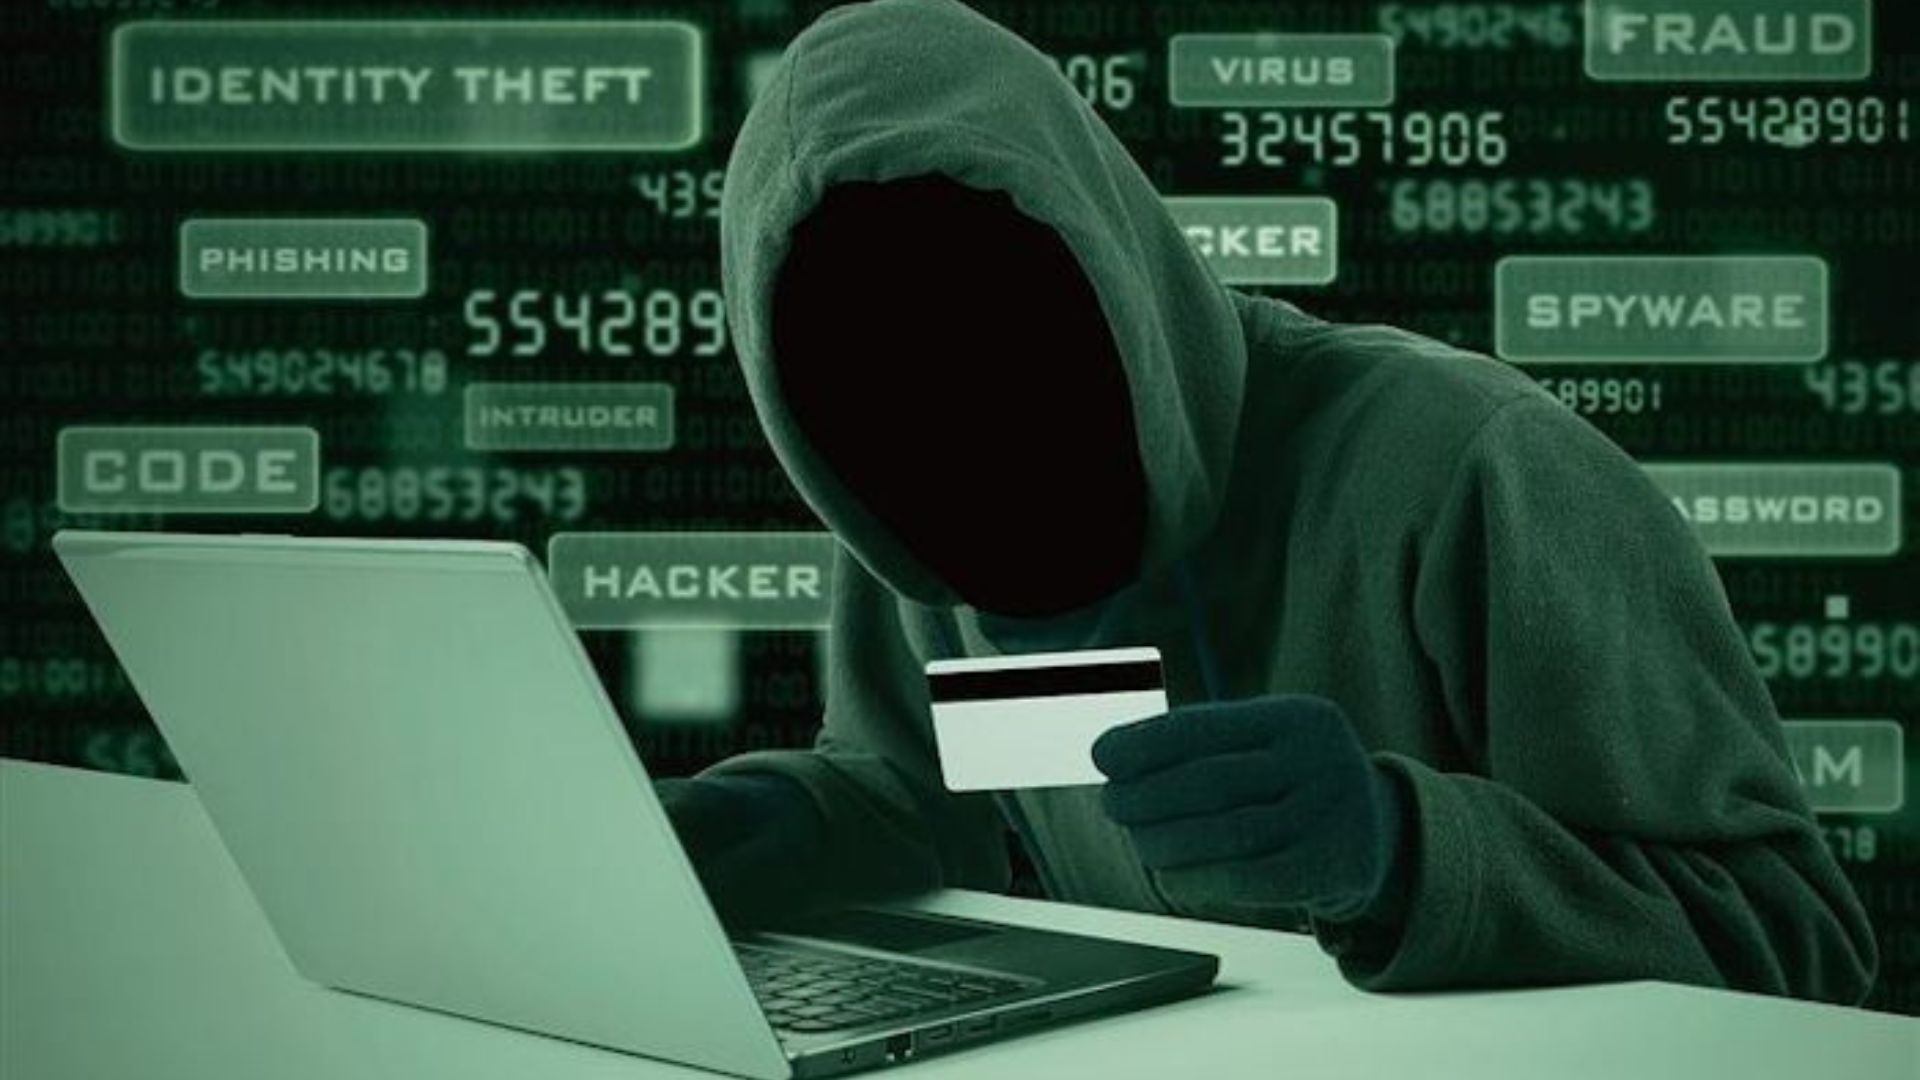 Panchkula Cyber Fraud: How Two Scammers Racked Up Rs 9 Crore In Just 10 Days